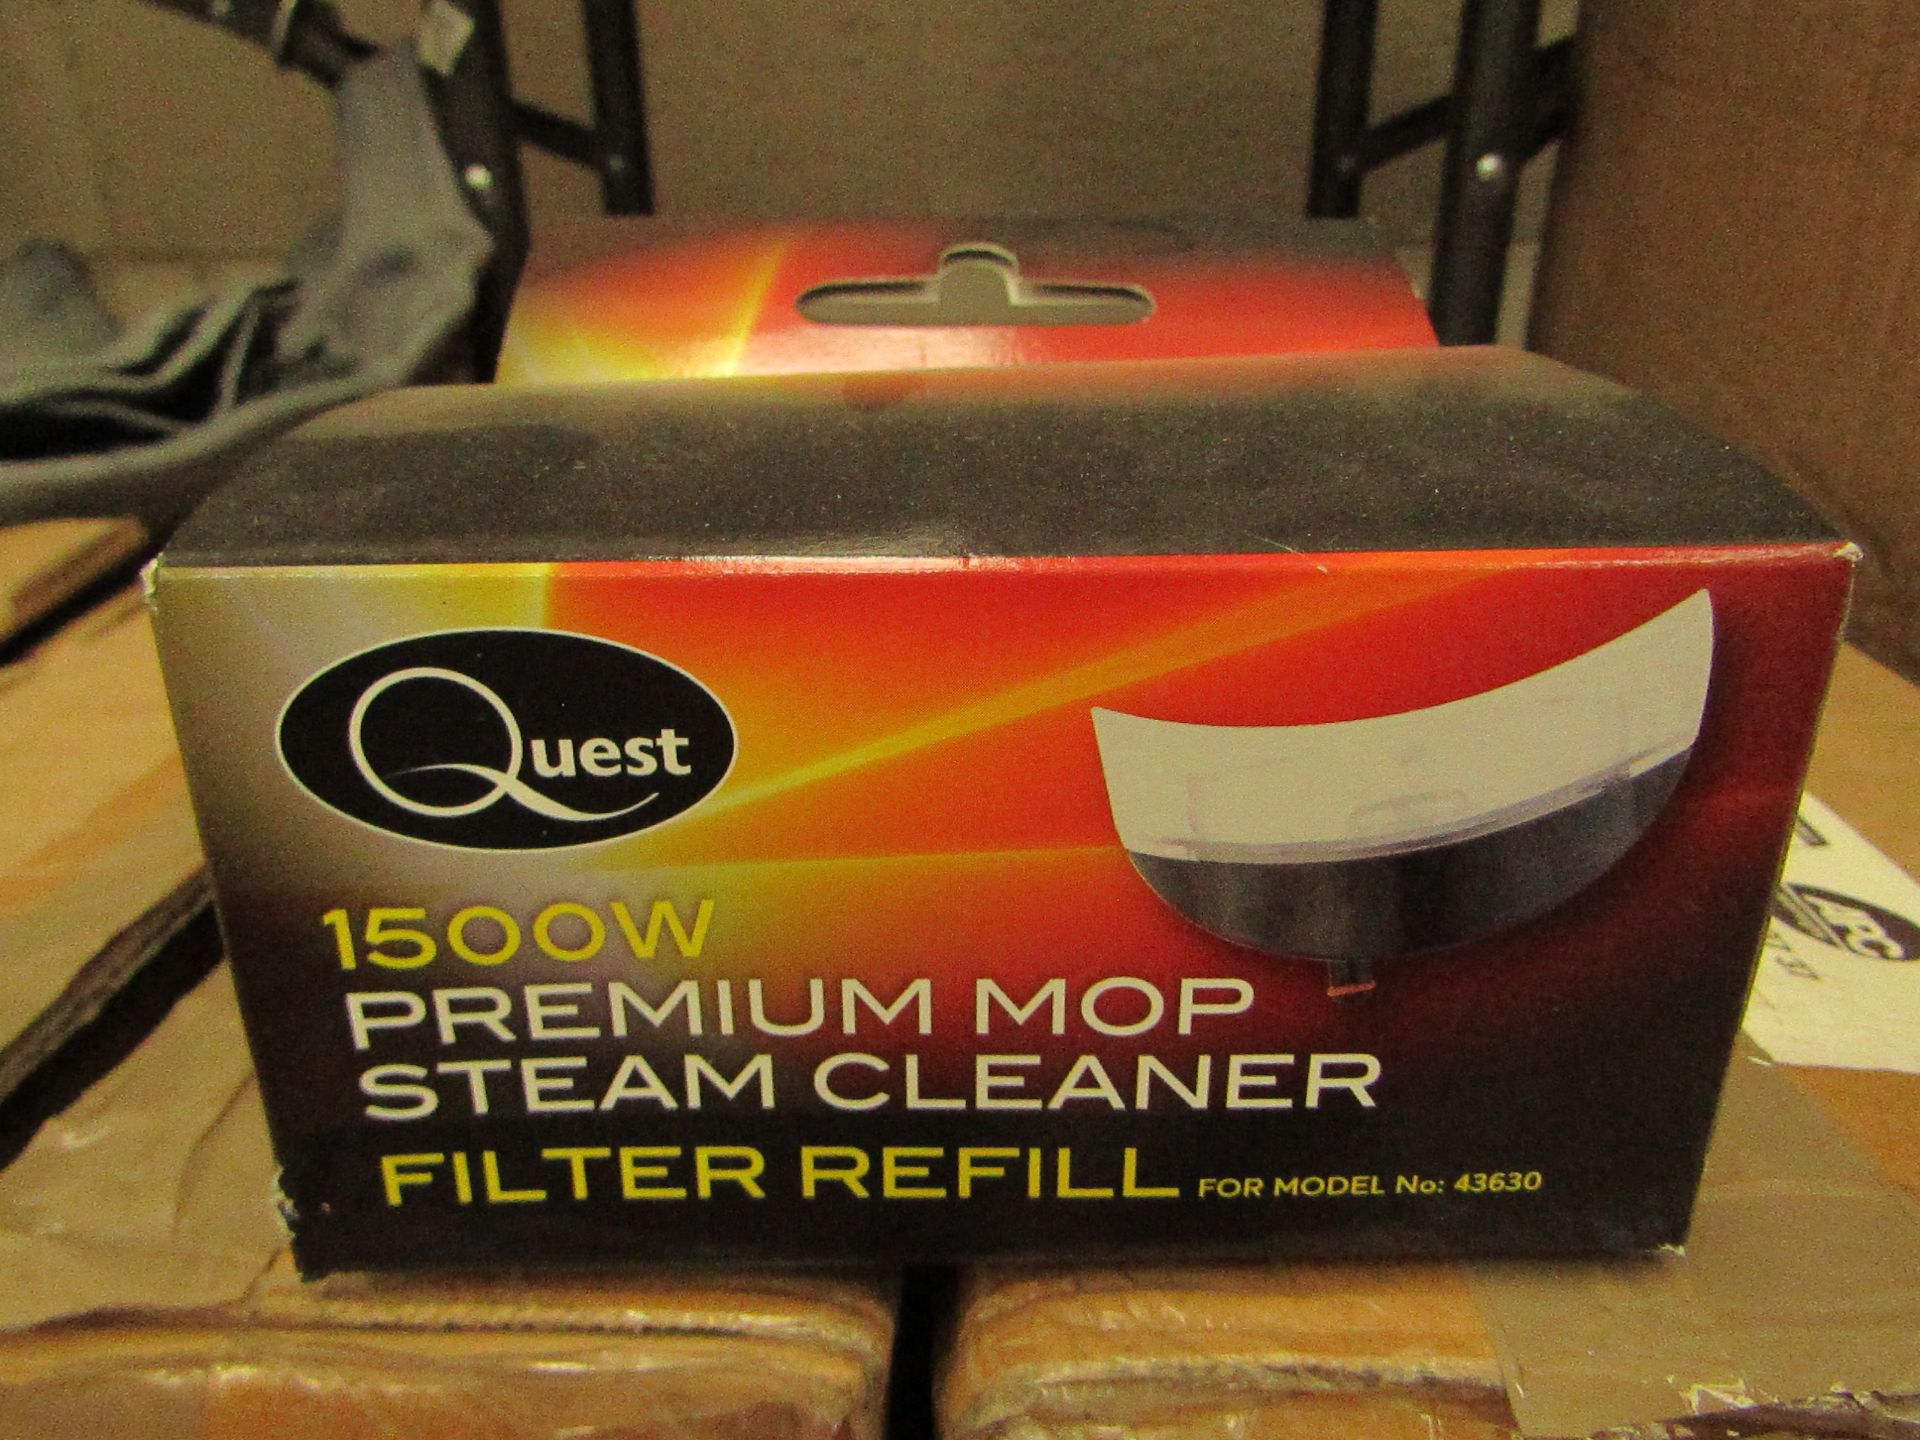 2x Boxes Containing 50x Quest - Premium Mop Steam Cleaner 1500w - Filter Refill - Unused & Boxed.